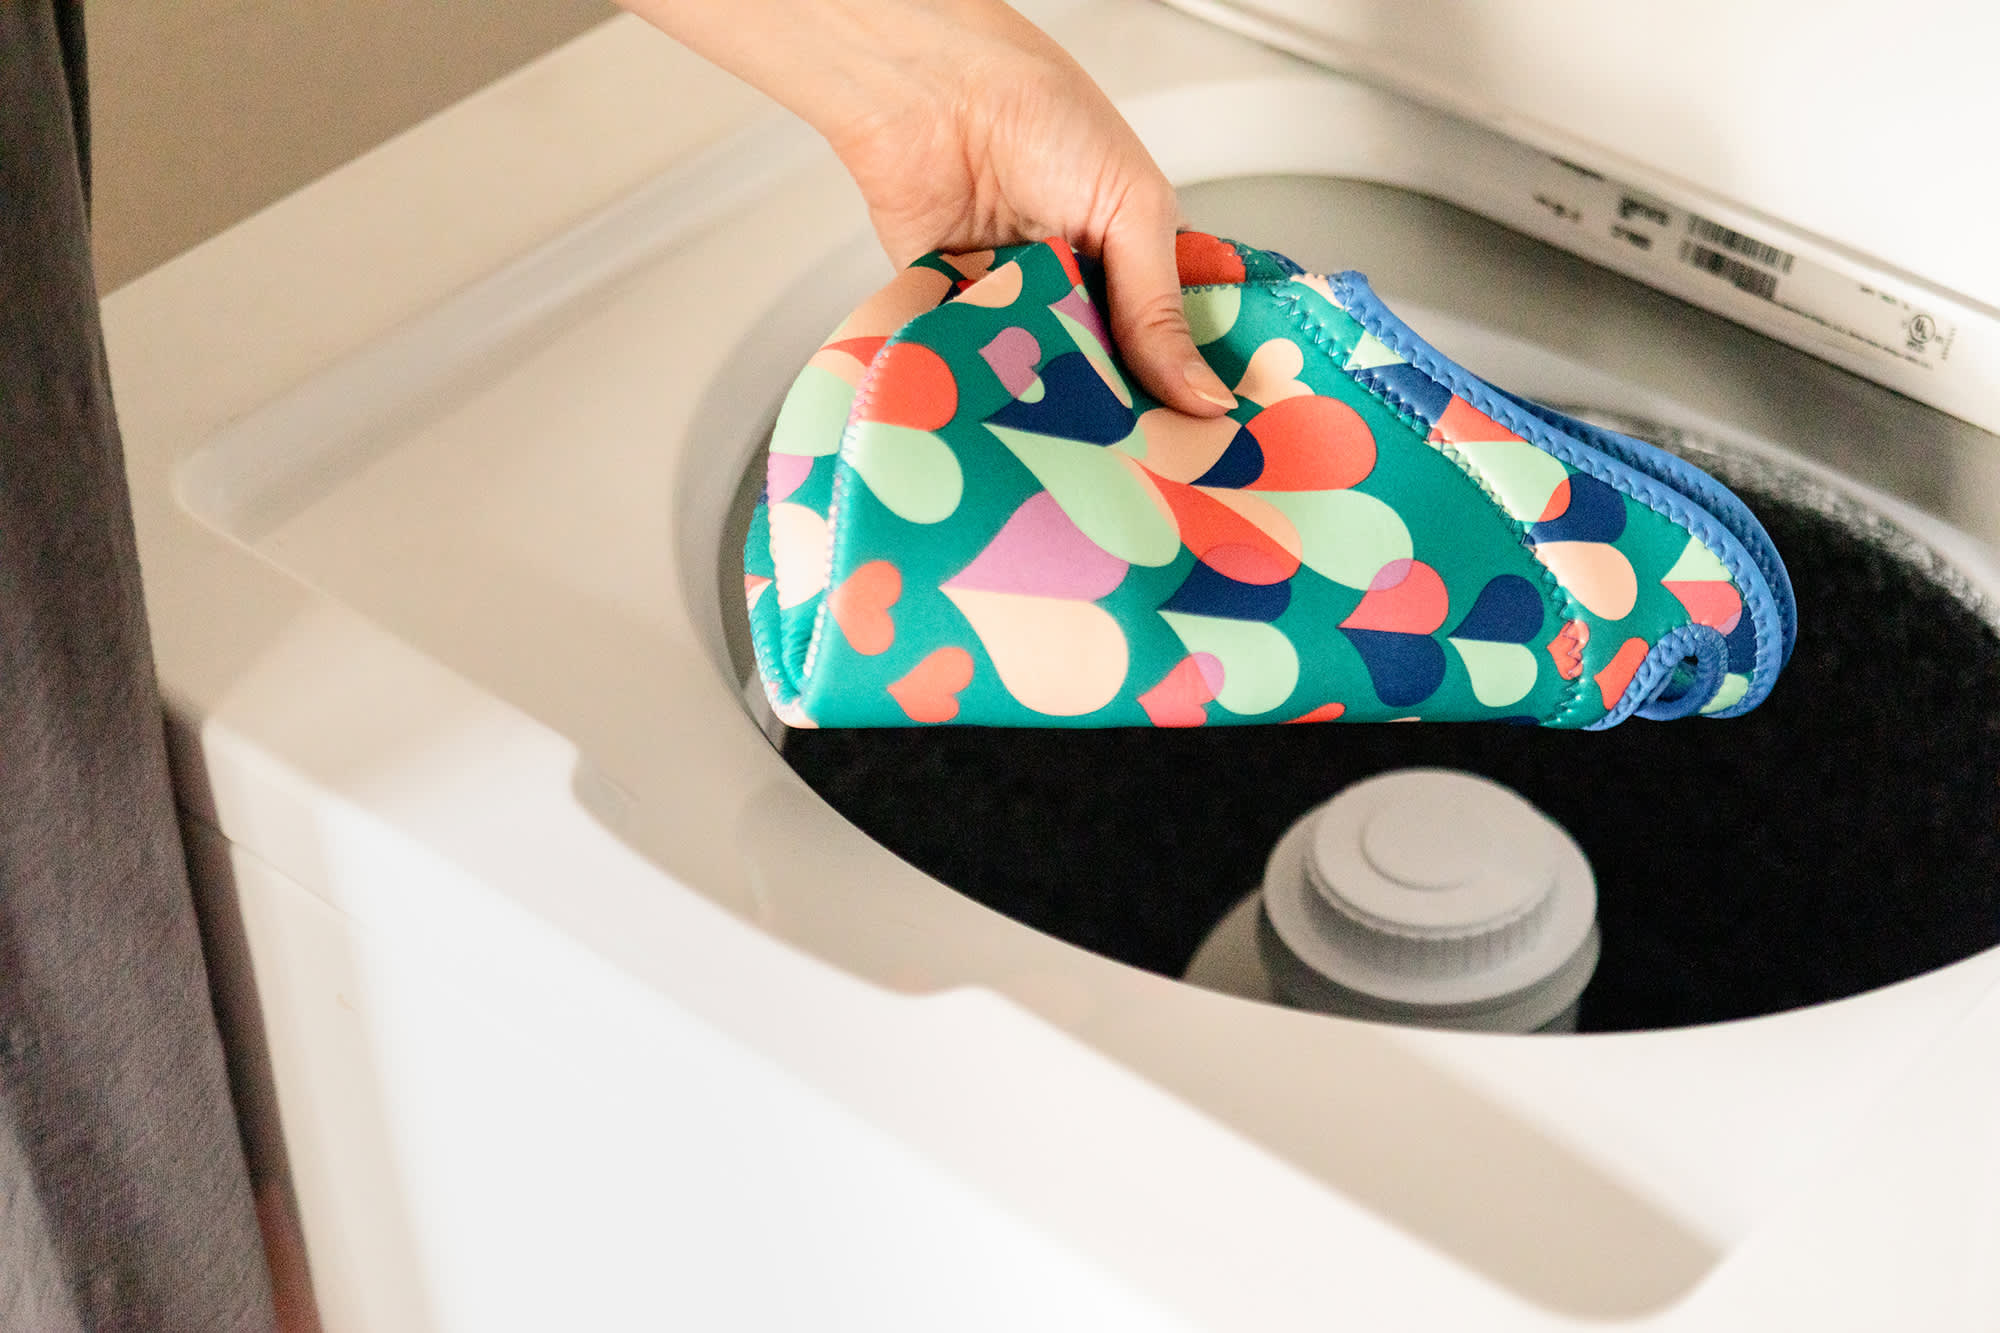 washable lunch box